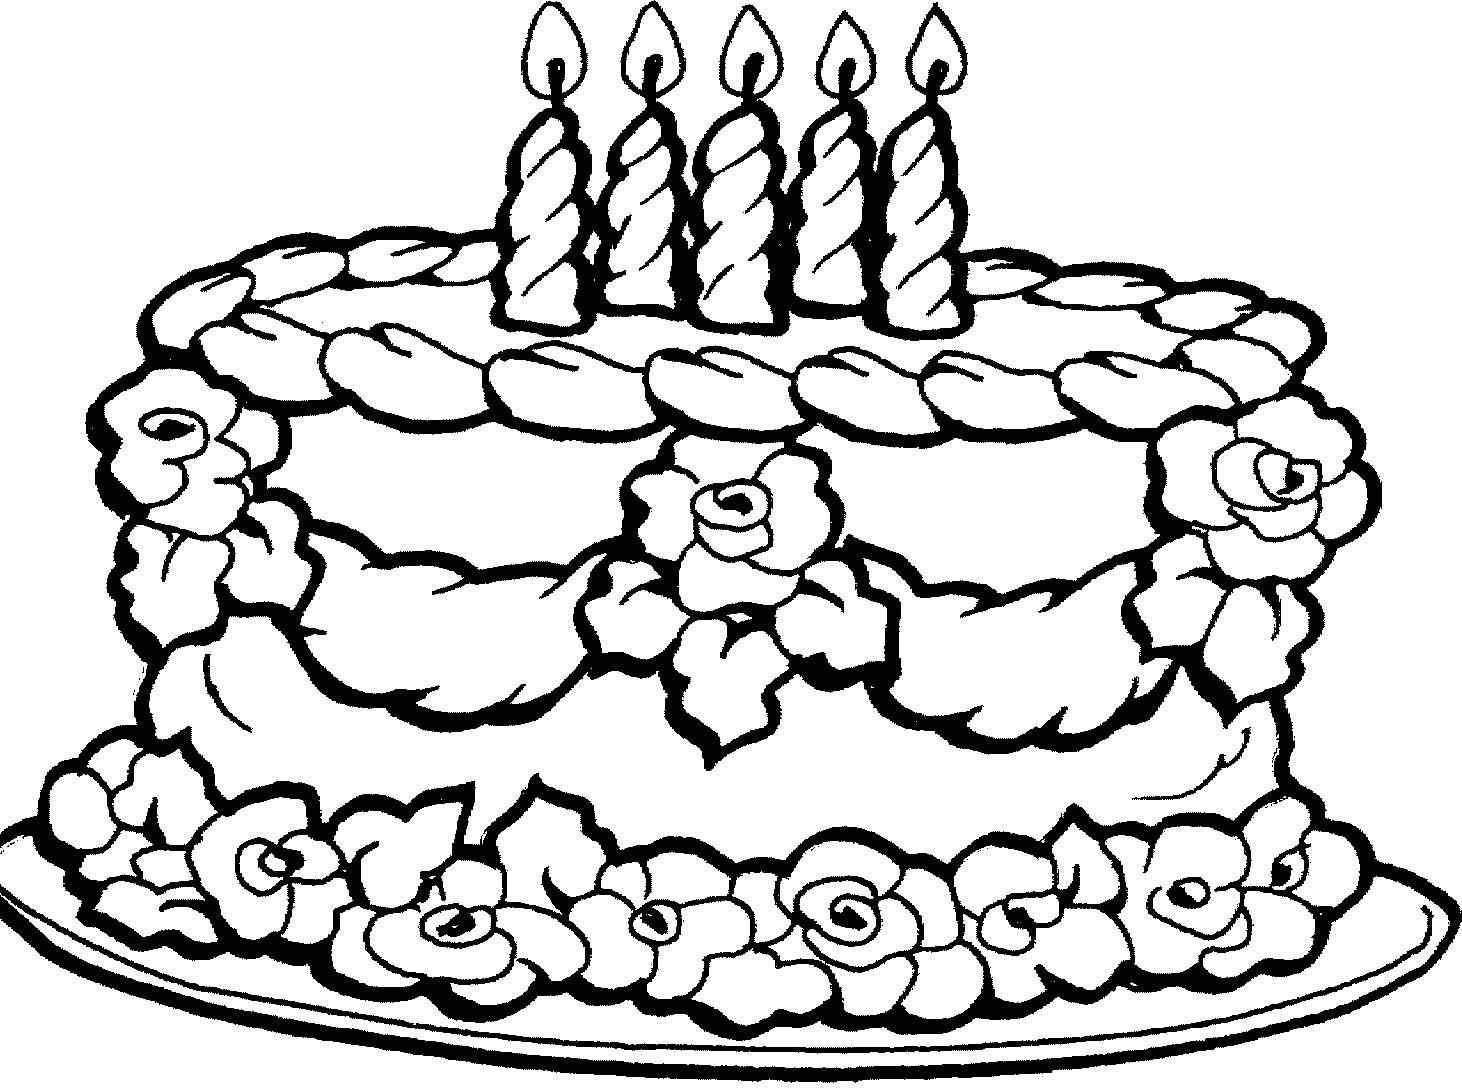 birthday-cake-coloring-pages-to-download-and-print-for-free